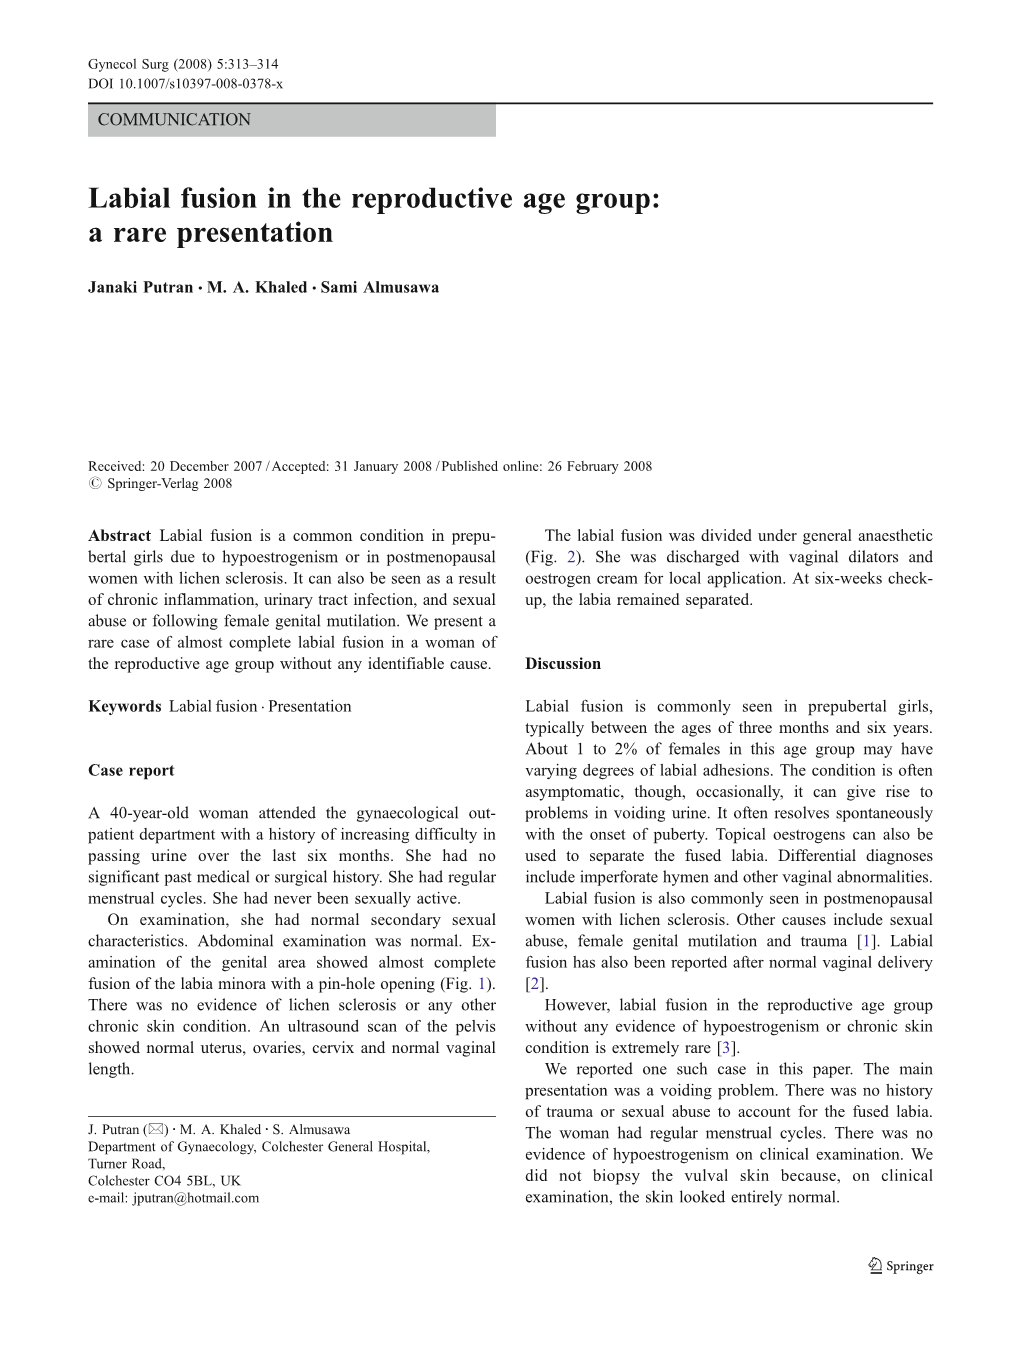 Labial Fusion in the Reproductive Age Group: a Rare Presentation